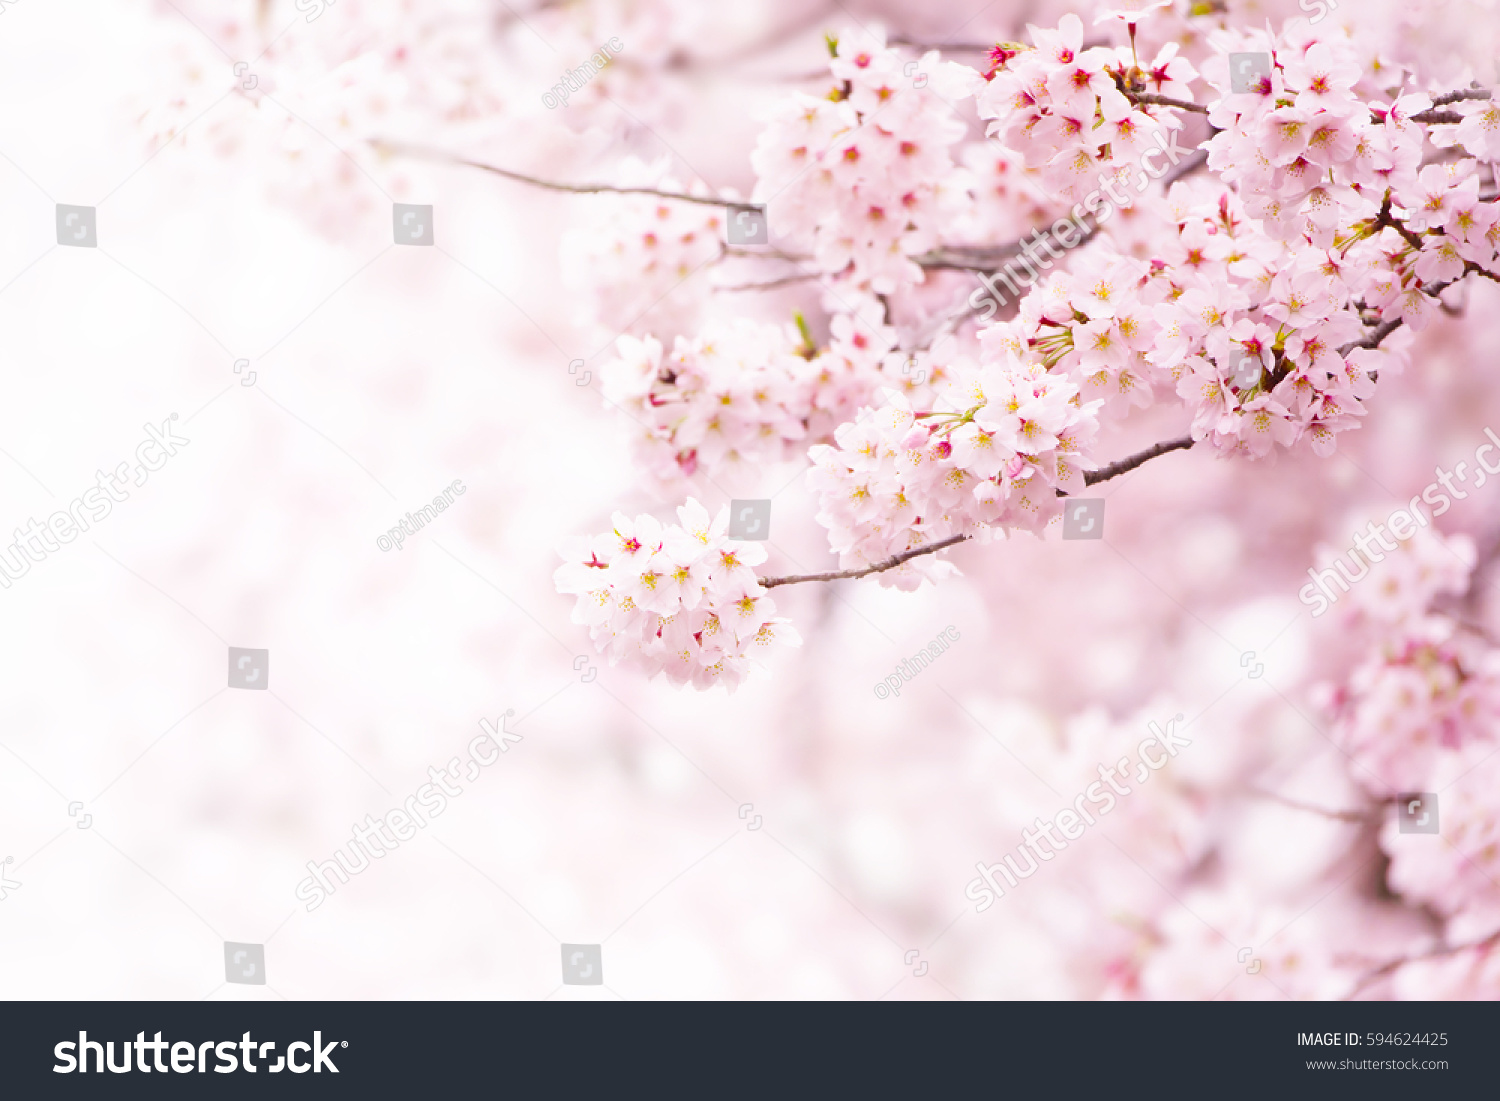 Cherry blossom in full bloom. Cherry flowers in small clusters on a cherry tree branch, fading in to white. Shallow depth of field. Focus on center flower cluster. #594624425